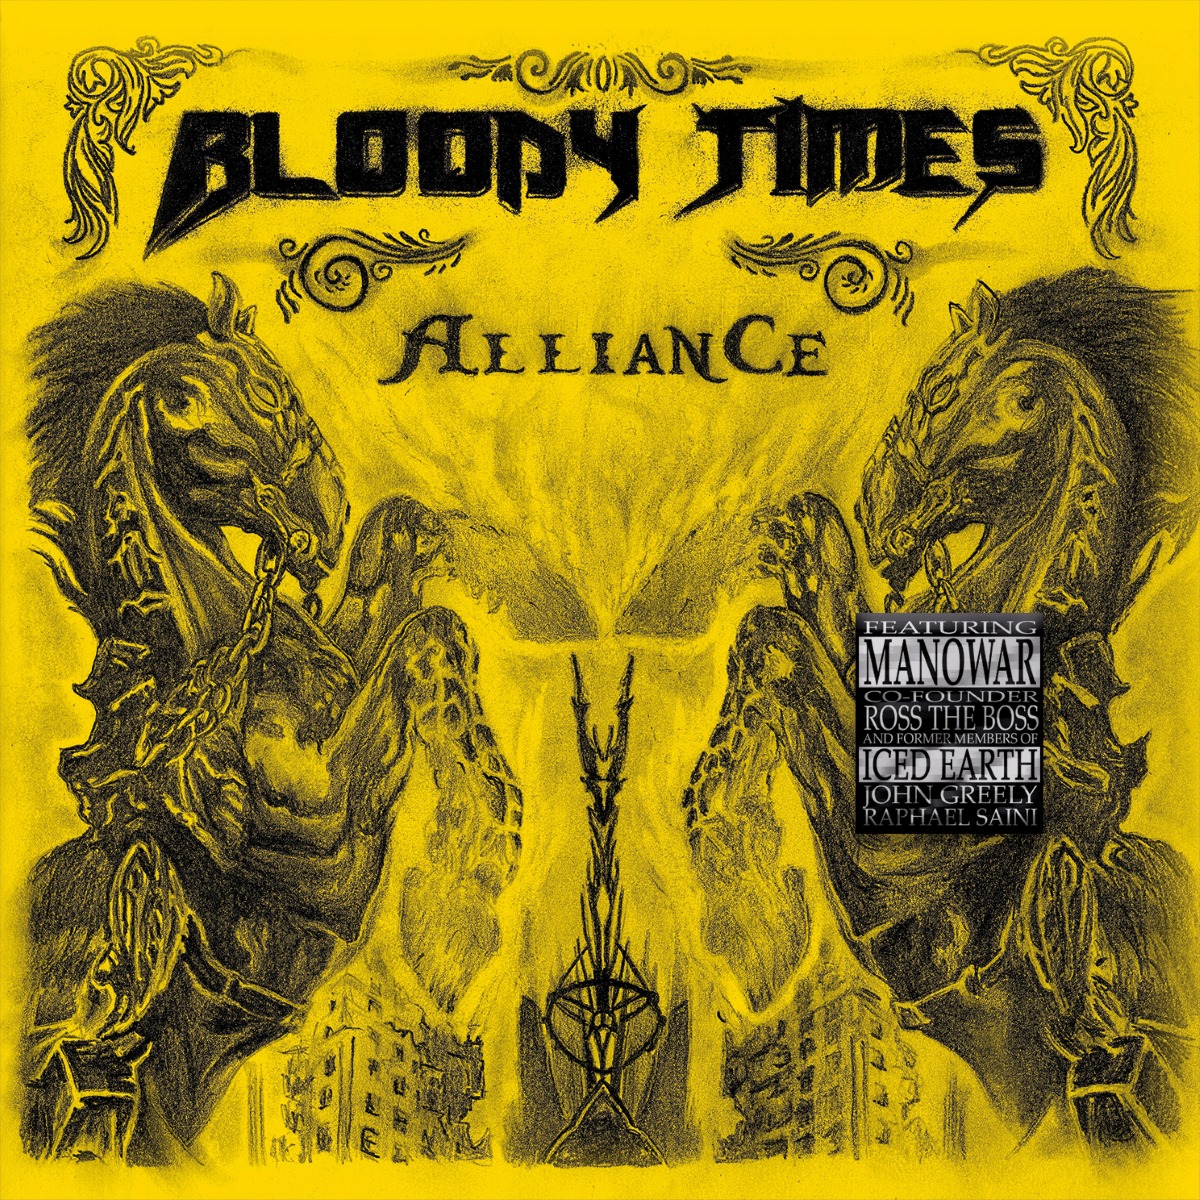 Alliance CD featuring MANOWAR co-founder Ross the Boss and former members of ICED EARTH John Greely and Raphael Saini